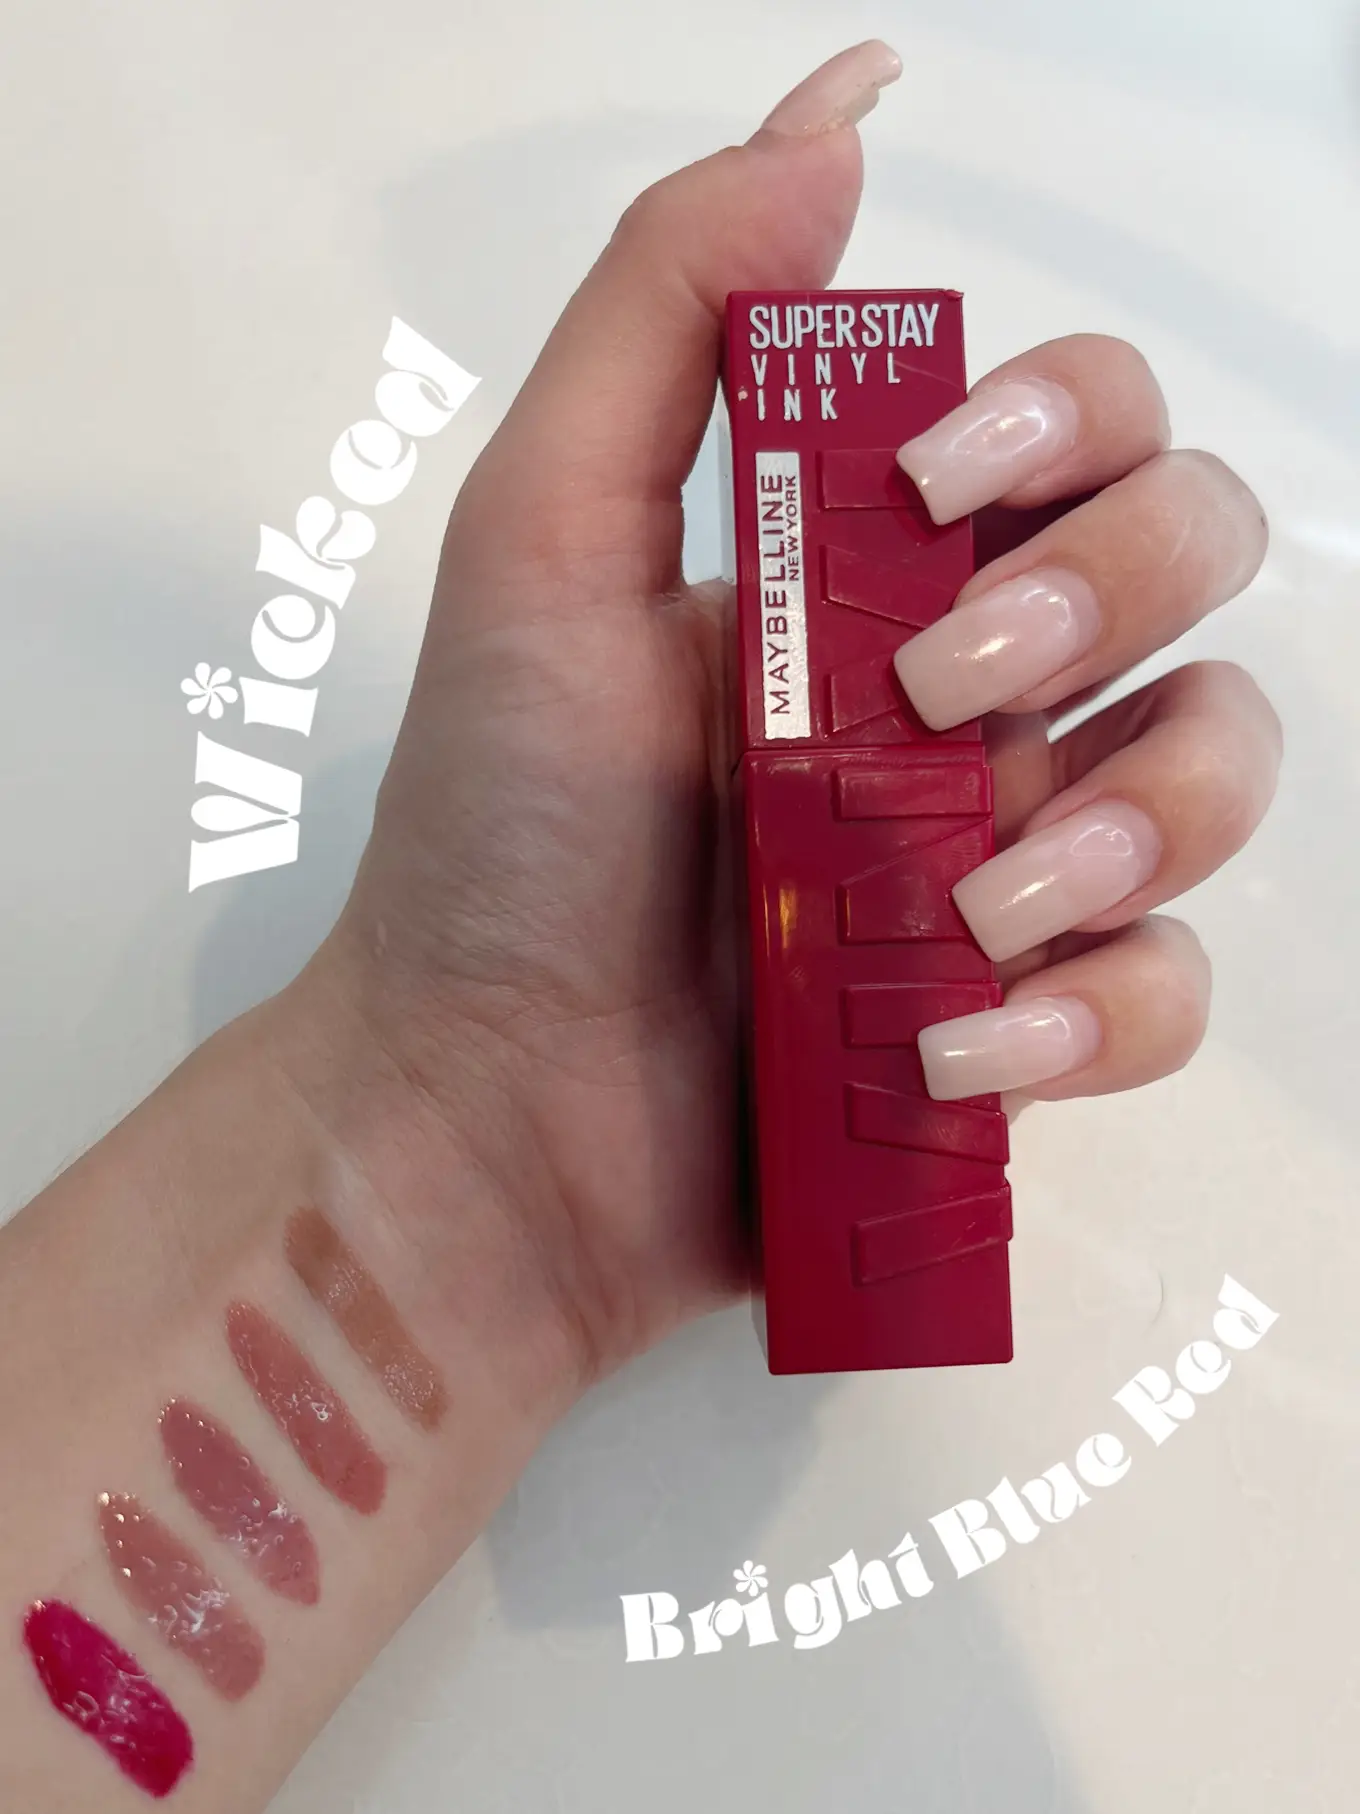 Maybelline Golden Super Stay Vinyl Ink Liquid Lipcolor Review & Swatches